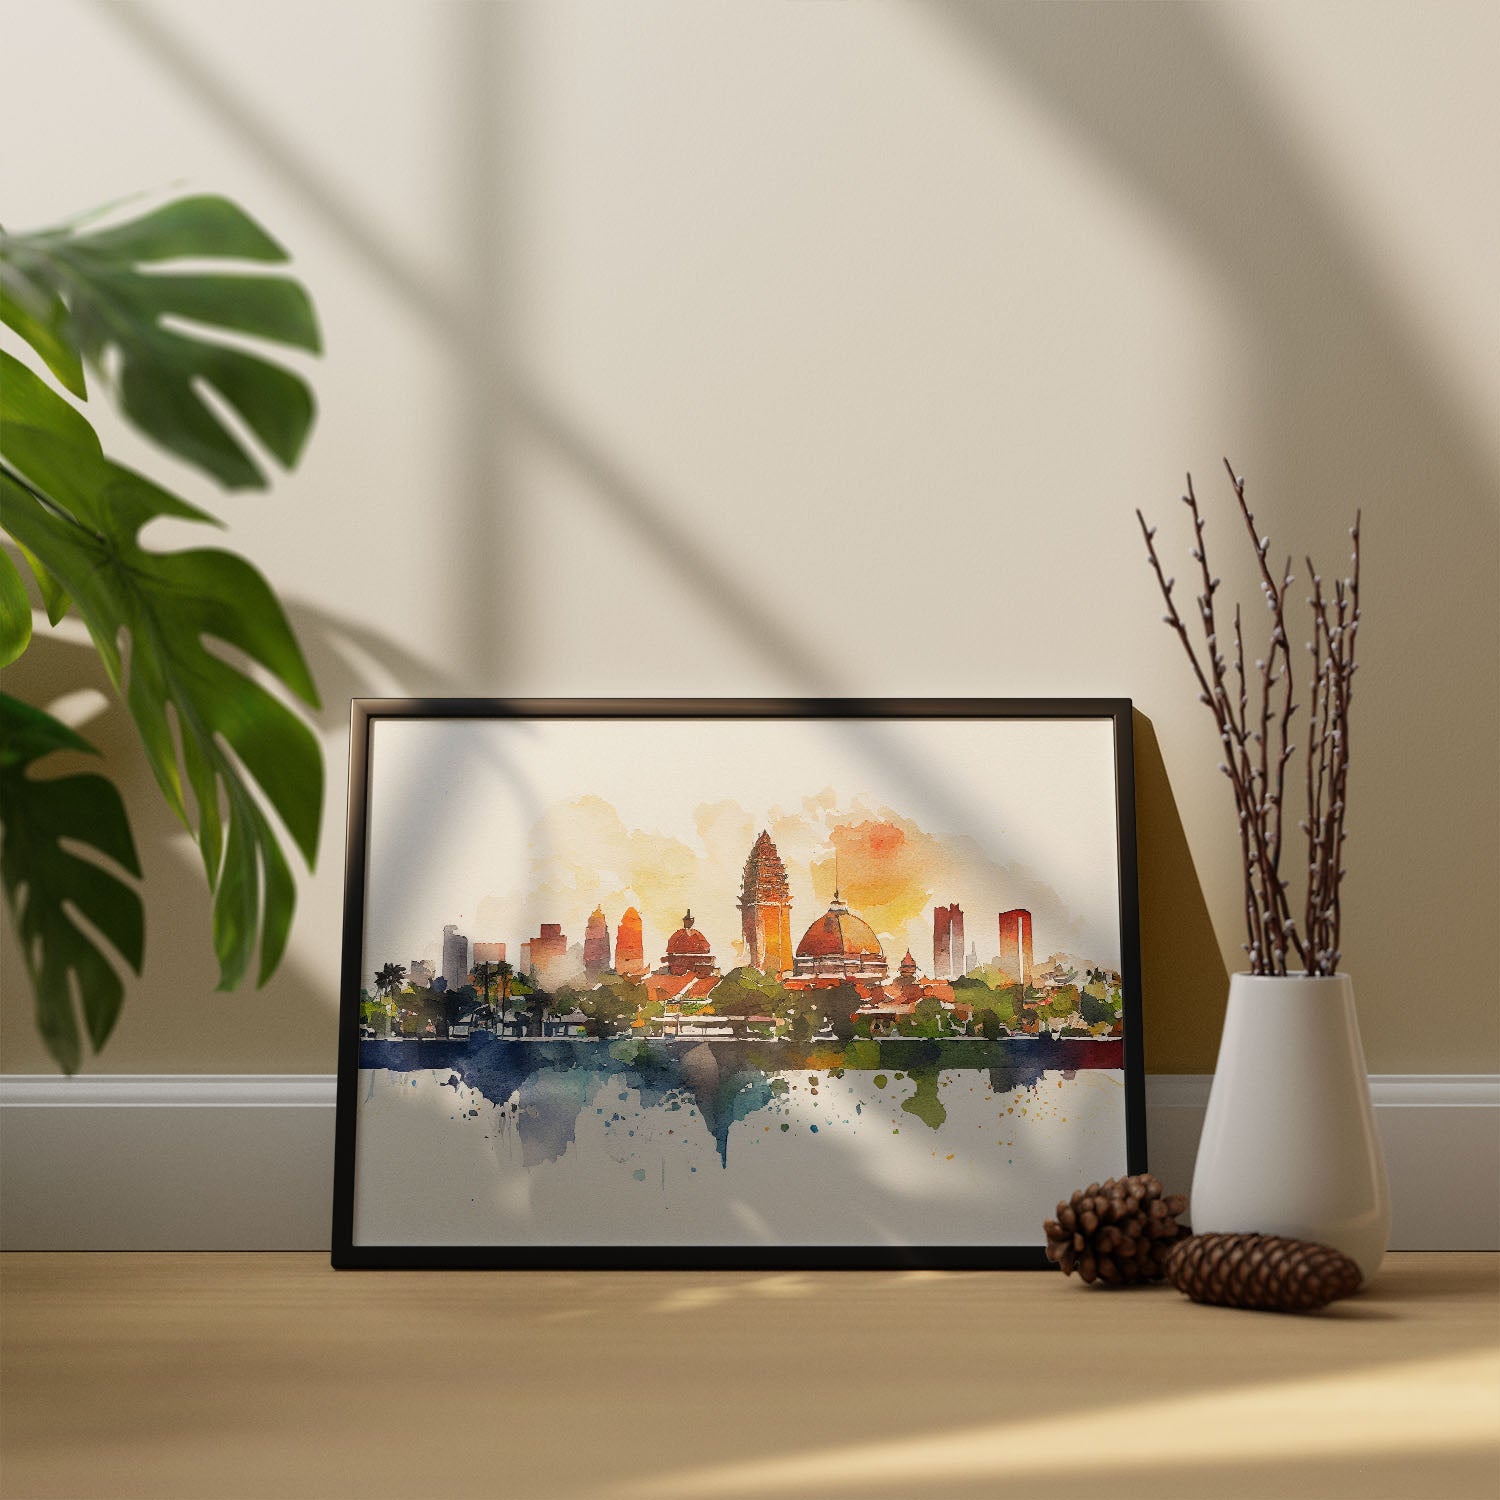 Nacnic watercolor of a skyline of the city of Bali_2. Aesthetic Wall Art Prints for Bedroom or Living Room Design.-Artwork-Nacnic-A4-Sin Marco-Nacnic Estudio SL